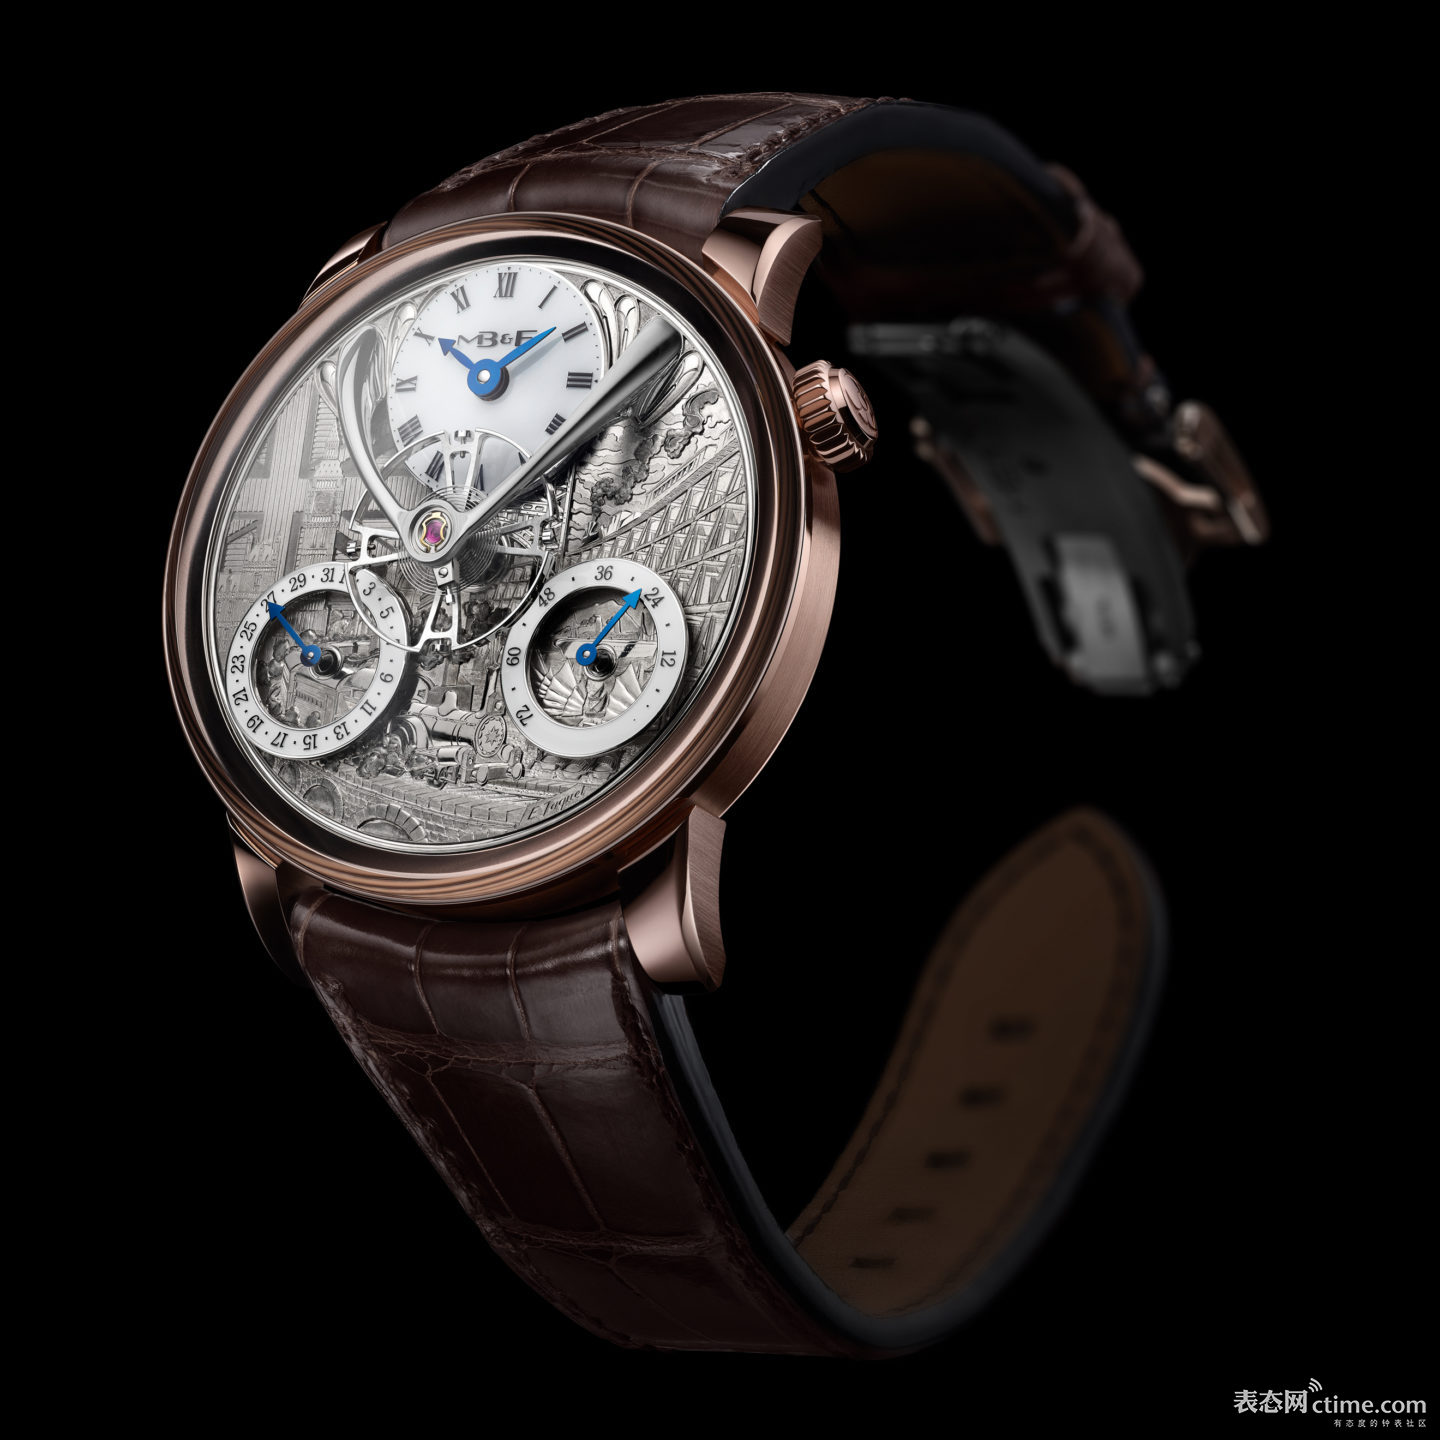 MBF-LM-SE-Eddy-Jaquet-Around-the-World-in-Eighty-Days-winning-watch-of-the-Artistic-Crafts-Watch-Prize-2021.jpeg